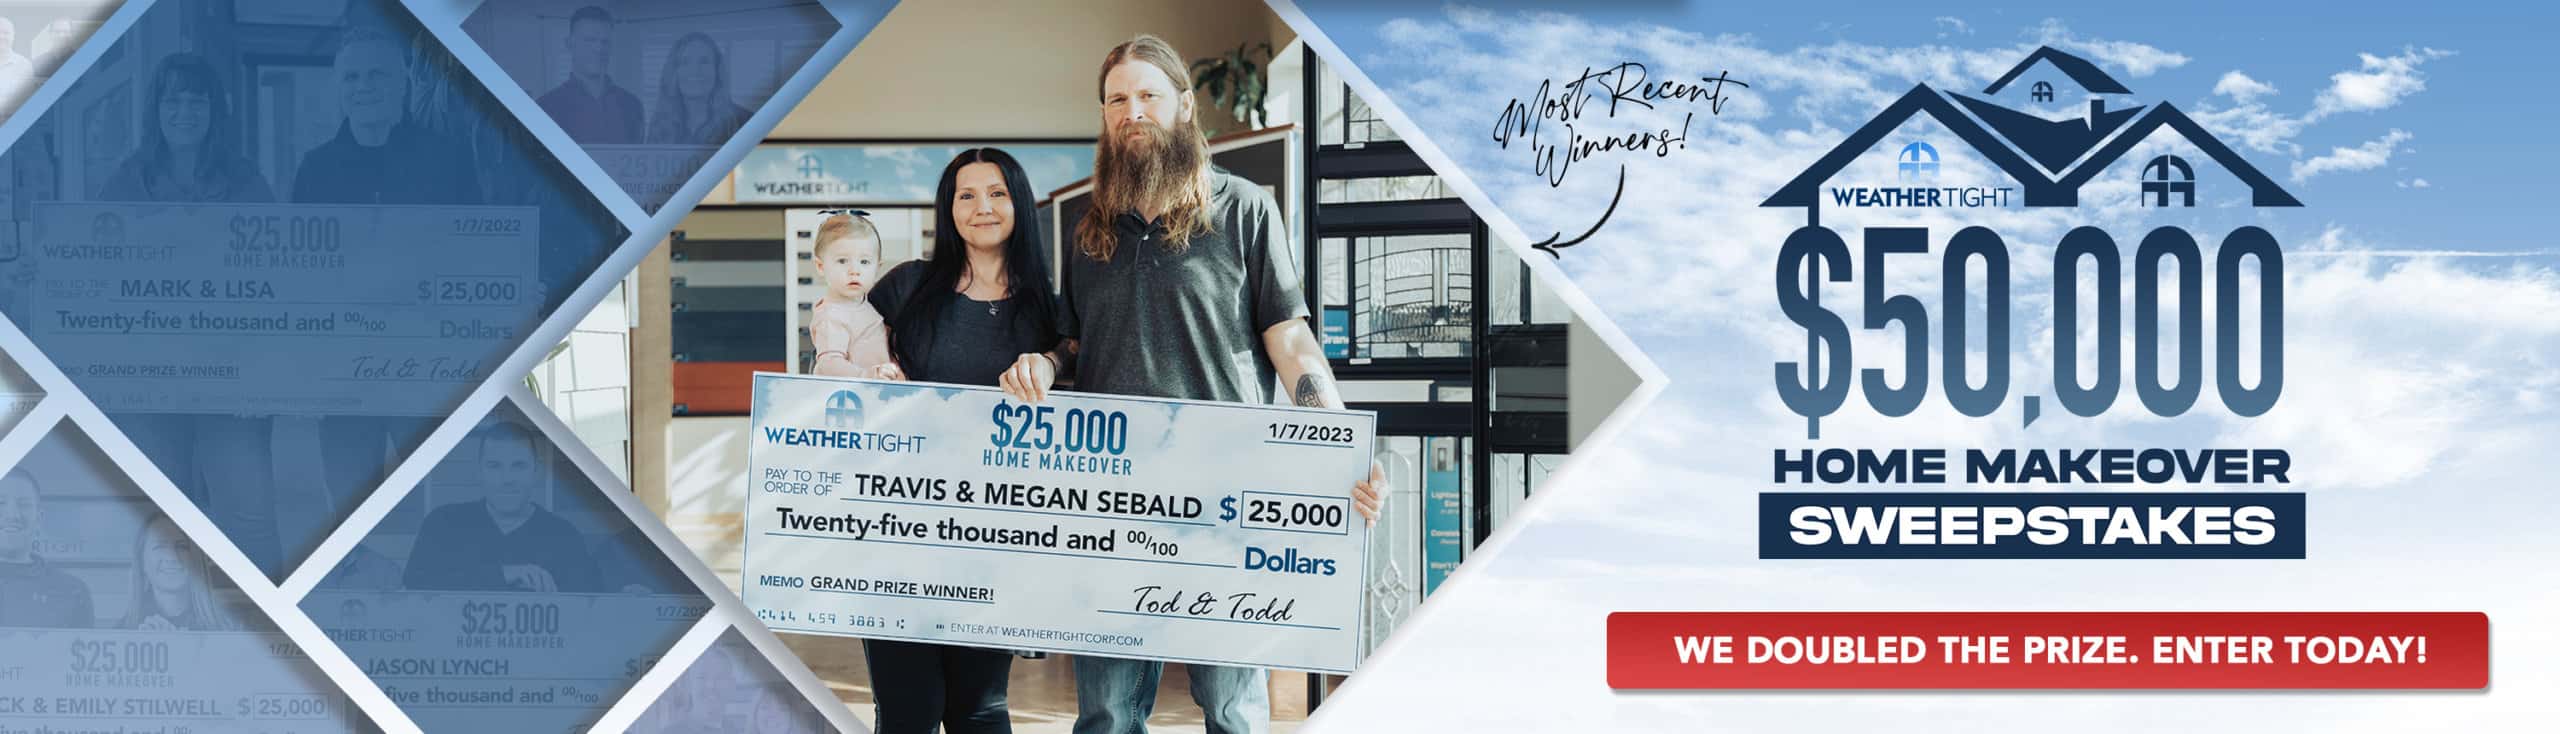 Weather Tight 2022 Home Makeover Sweepstakes Winners Travis & Megan Sebald